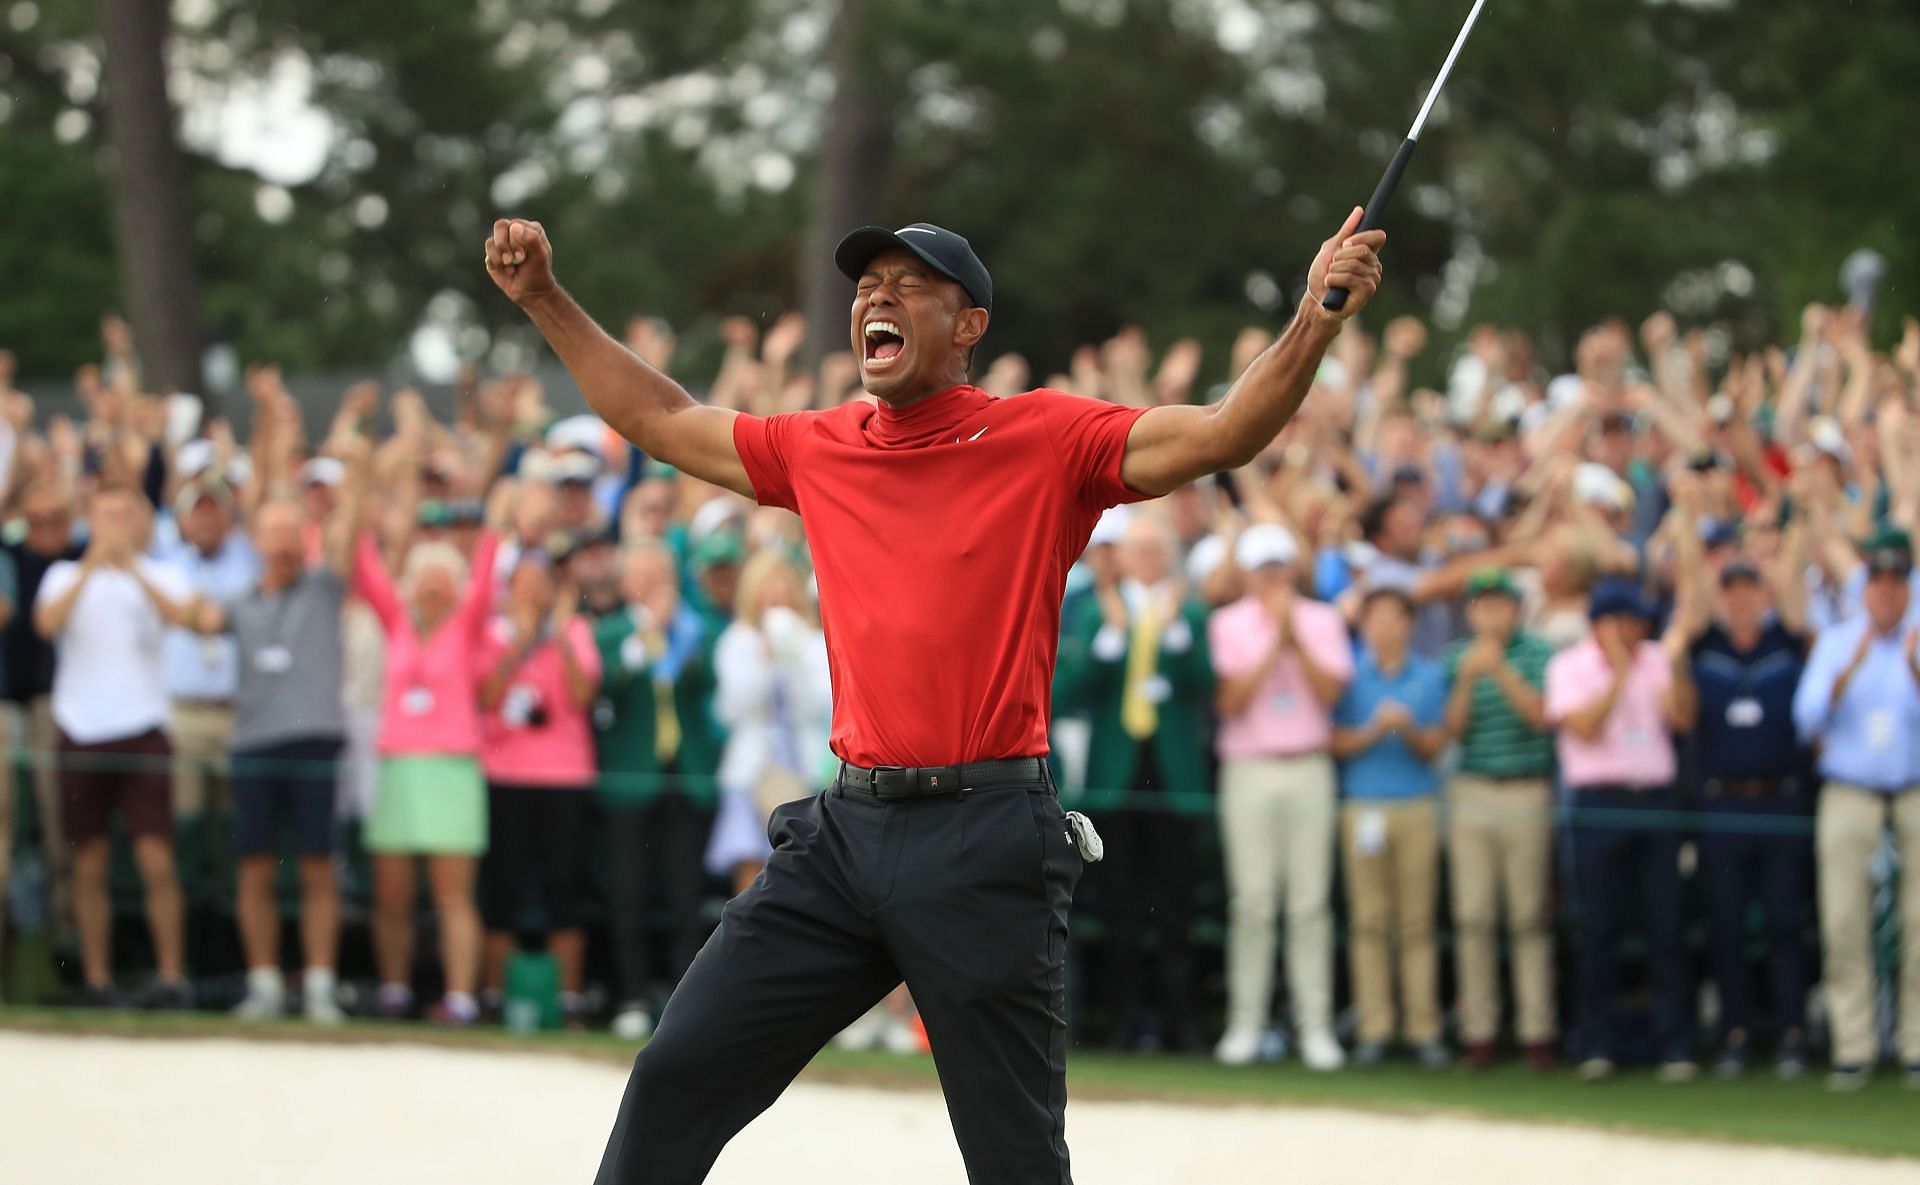 Tiger Woods at The Masters final round in Augusta, Georgia (Image via Getty)